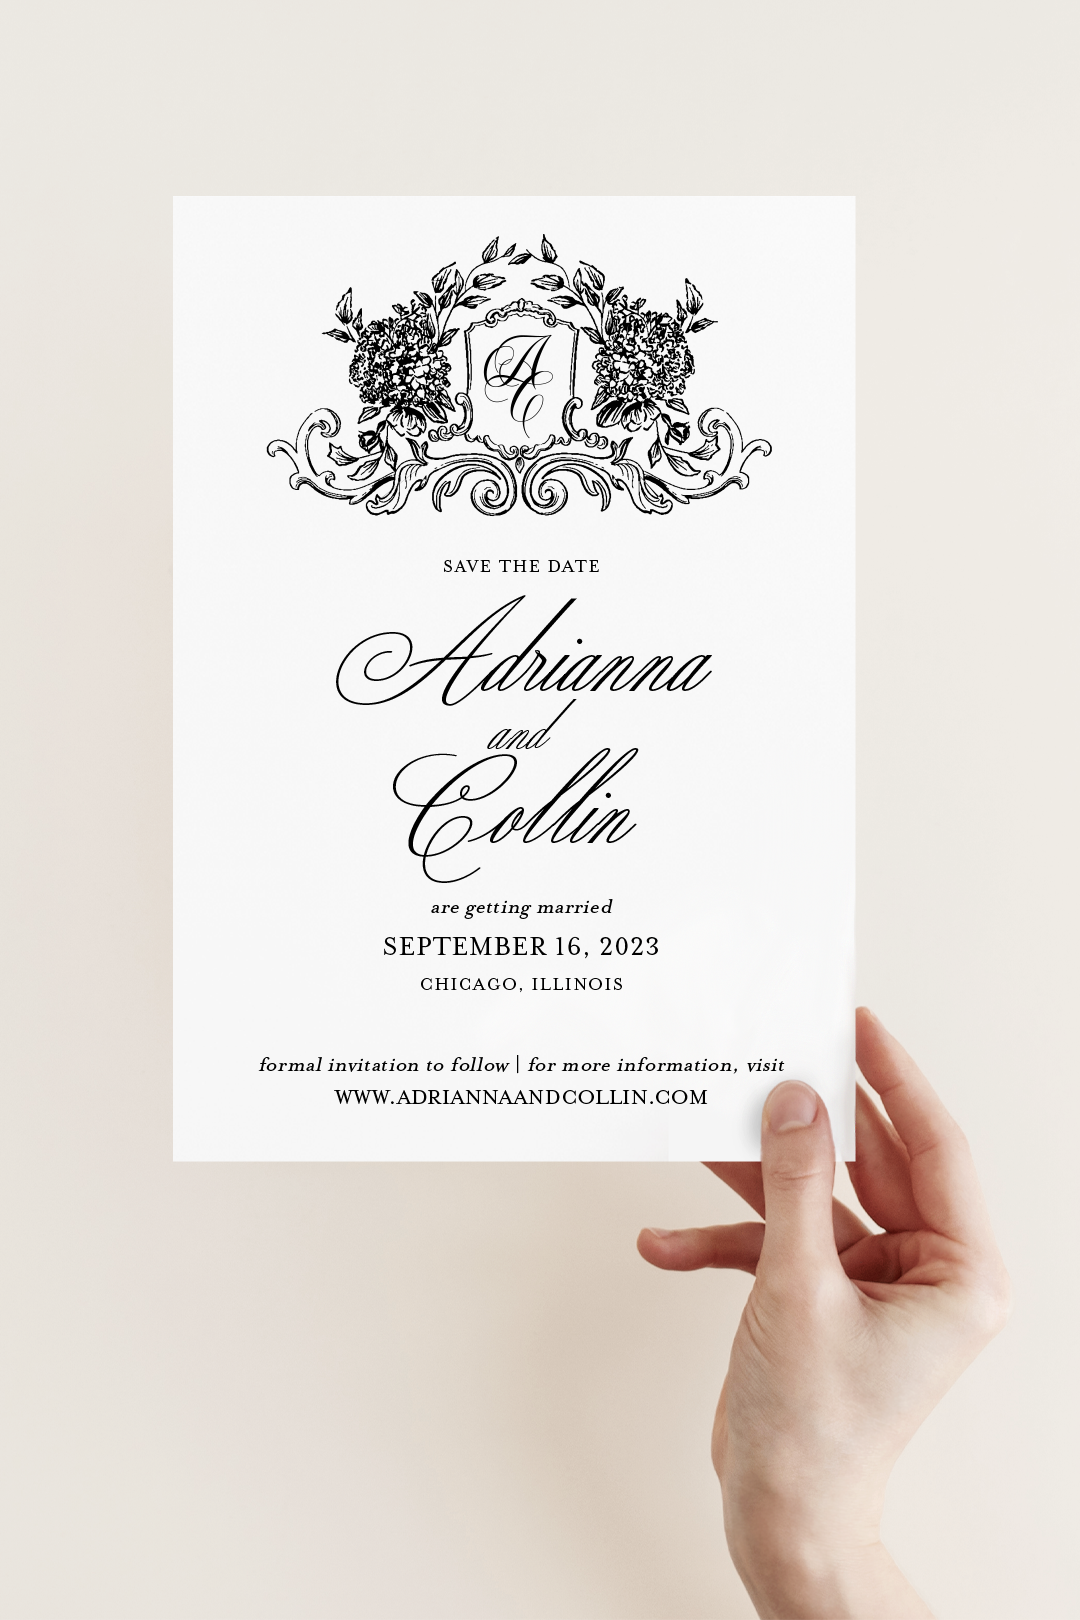 Adrianna Collection | 5"x 7" (A7) Save the Date Card | Flat Printing